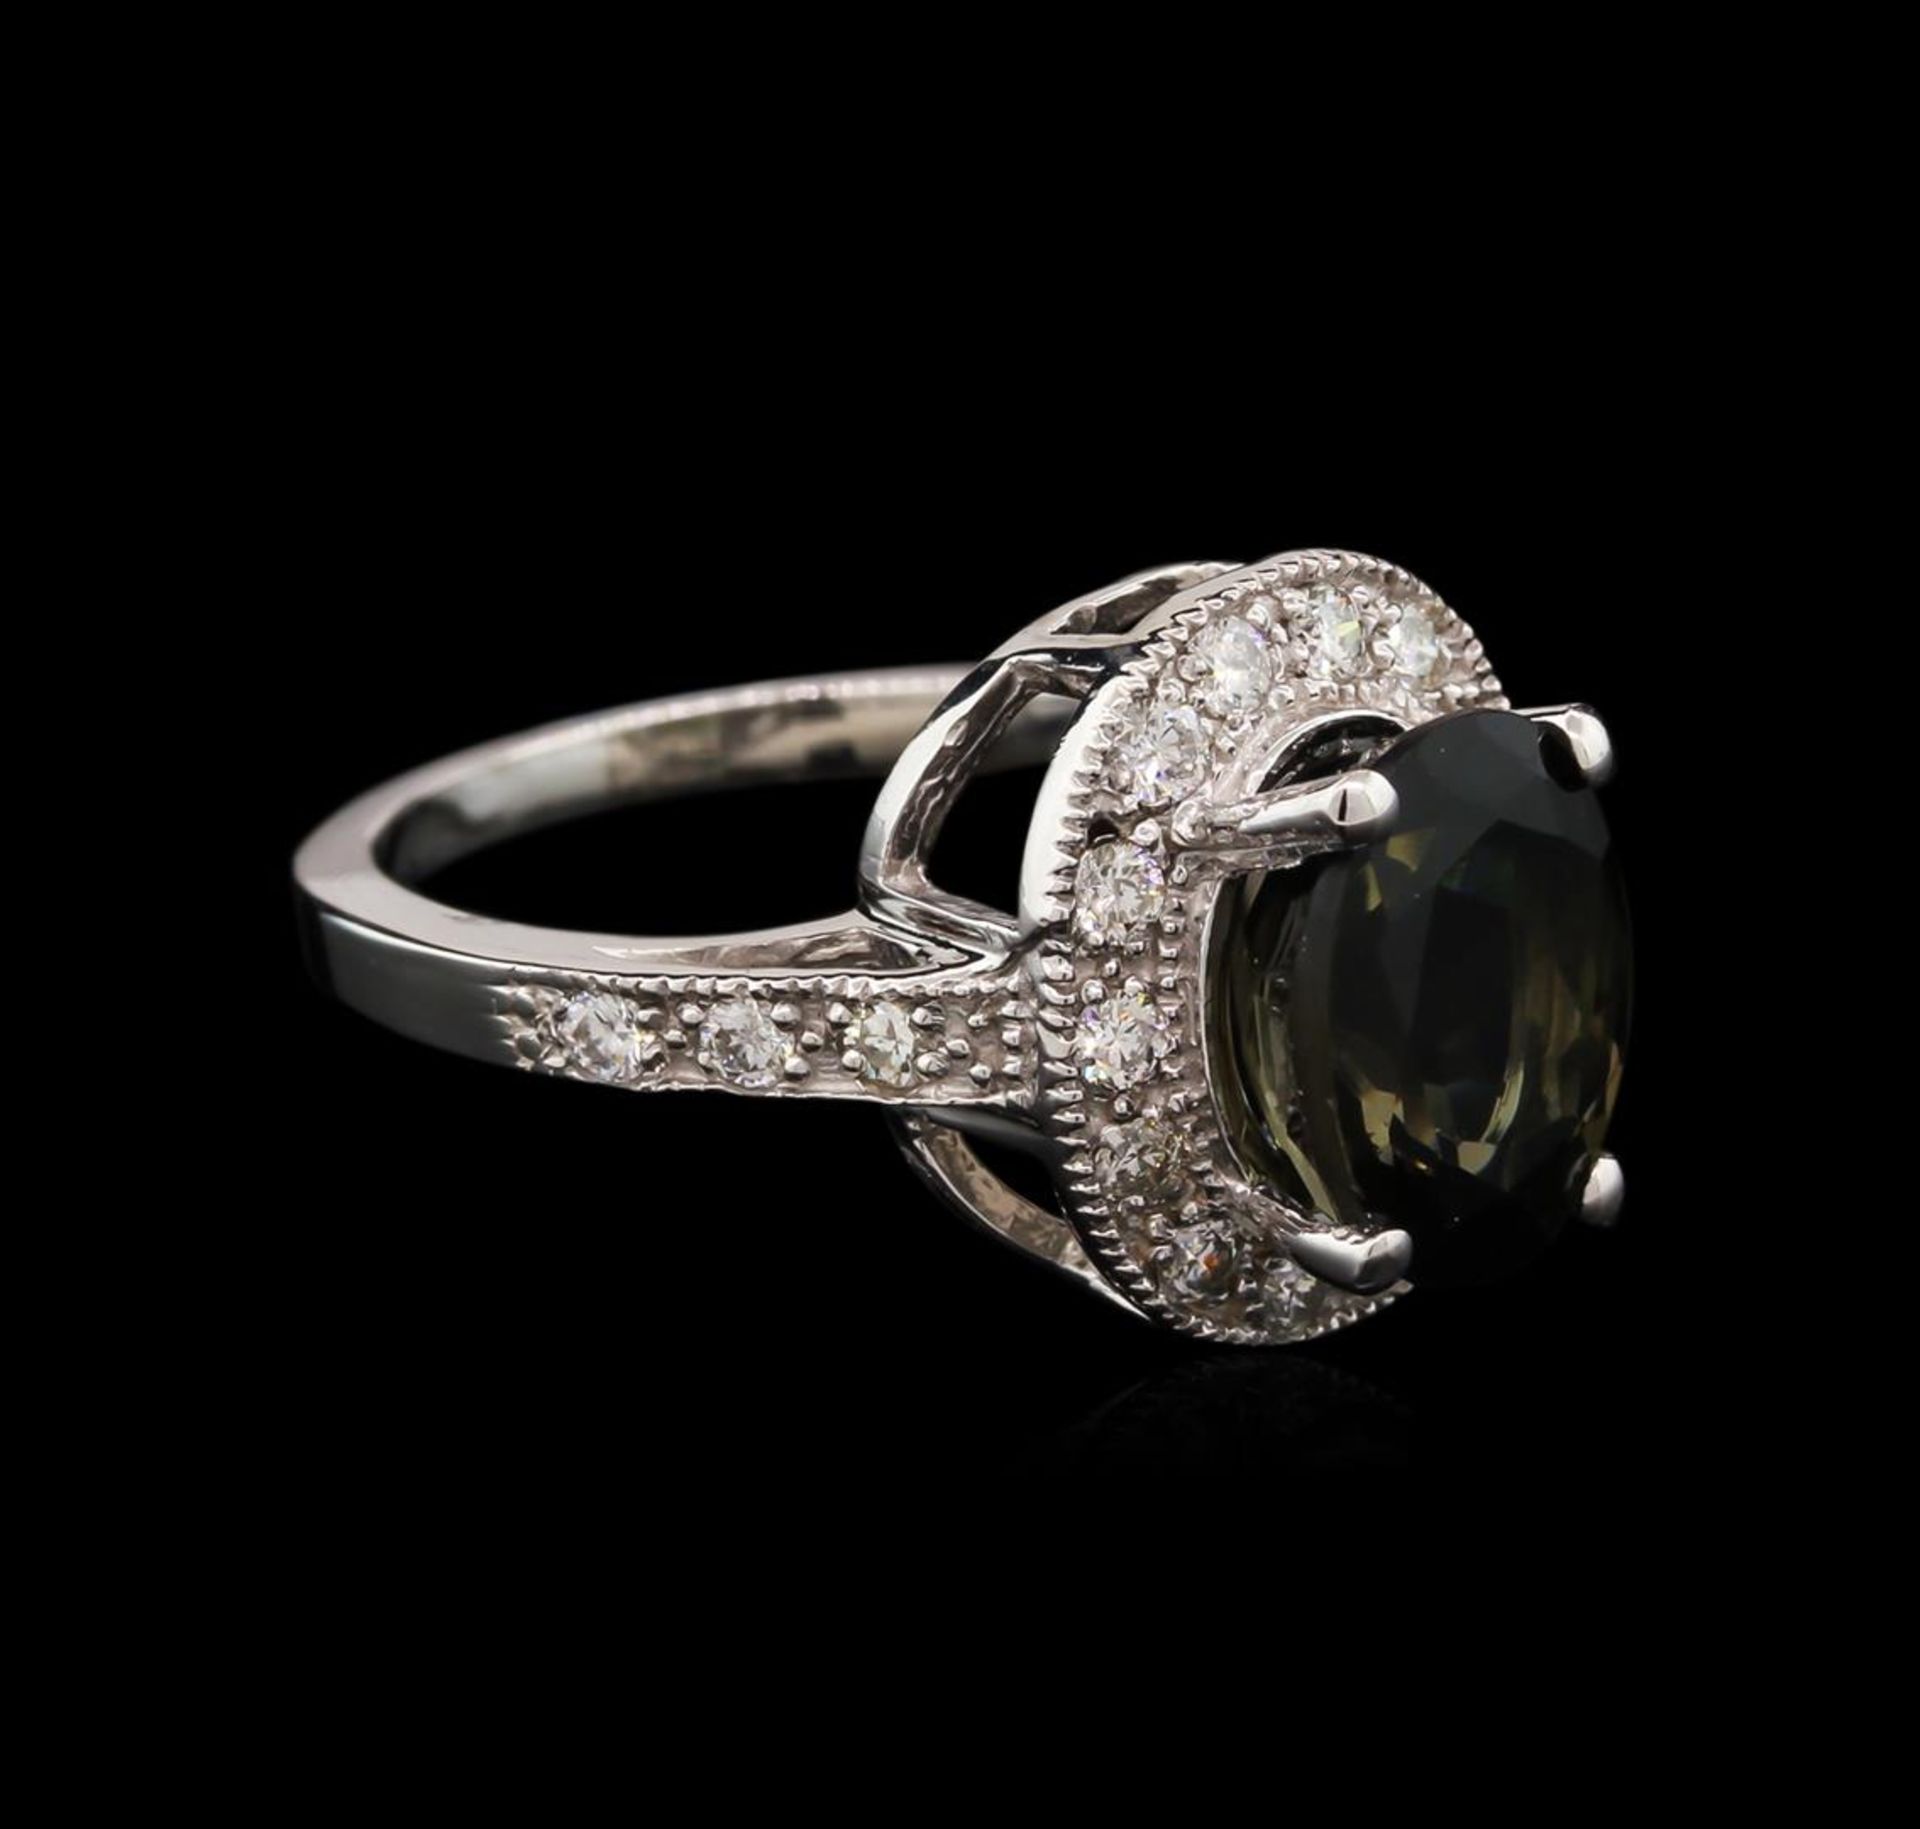 4.03 ctw Tourmaline and Diamond Ring - 14KT White Gold - Image 2 of 2